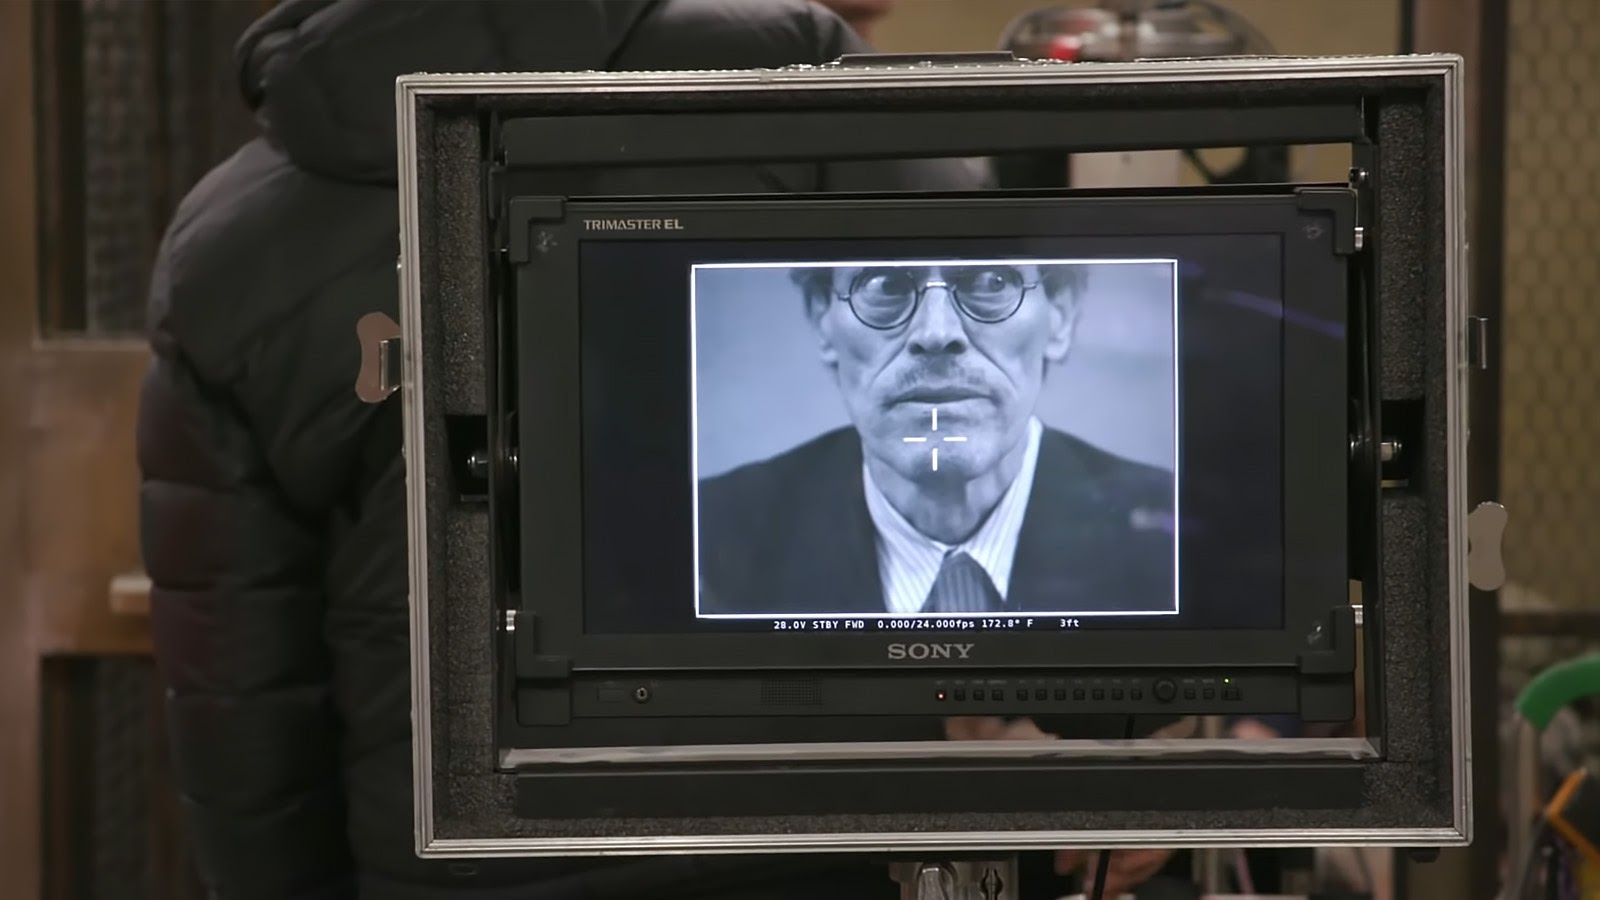 Willem Dafoe as Albert “the Abacus” framed in a monitor on the set for The French Dispatch. Image © Searchlight Pictures